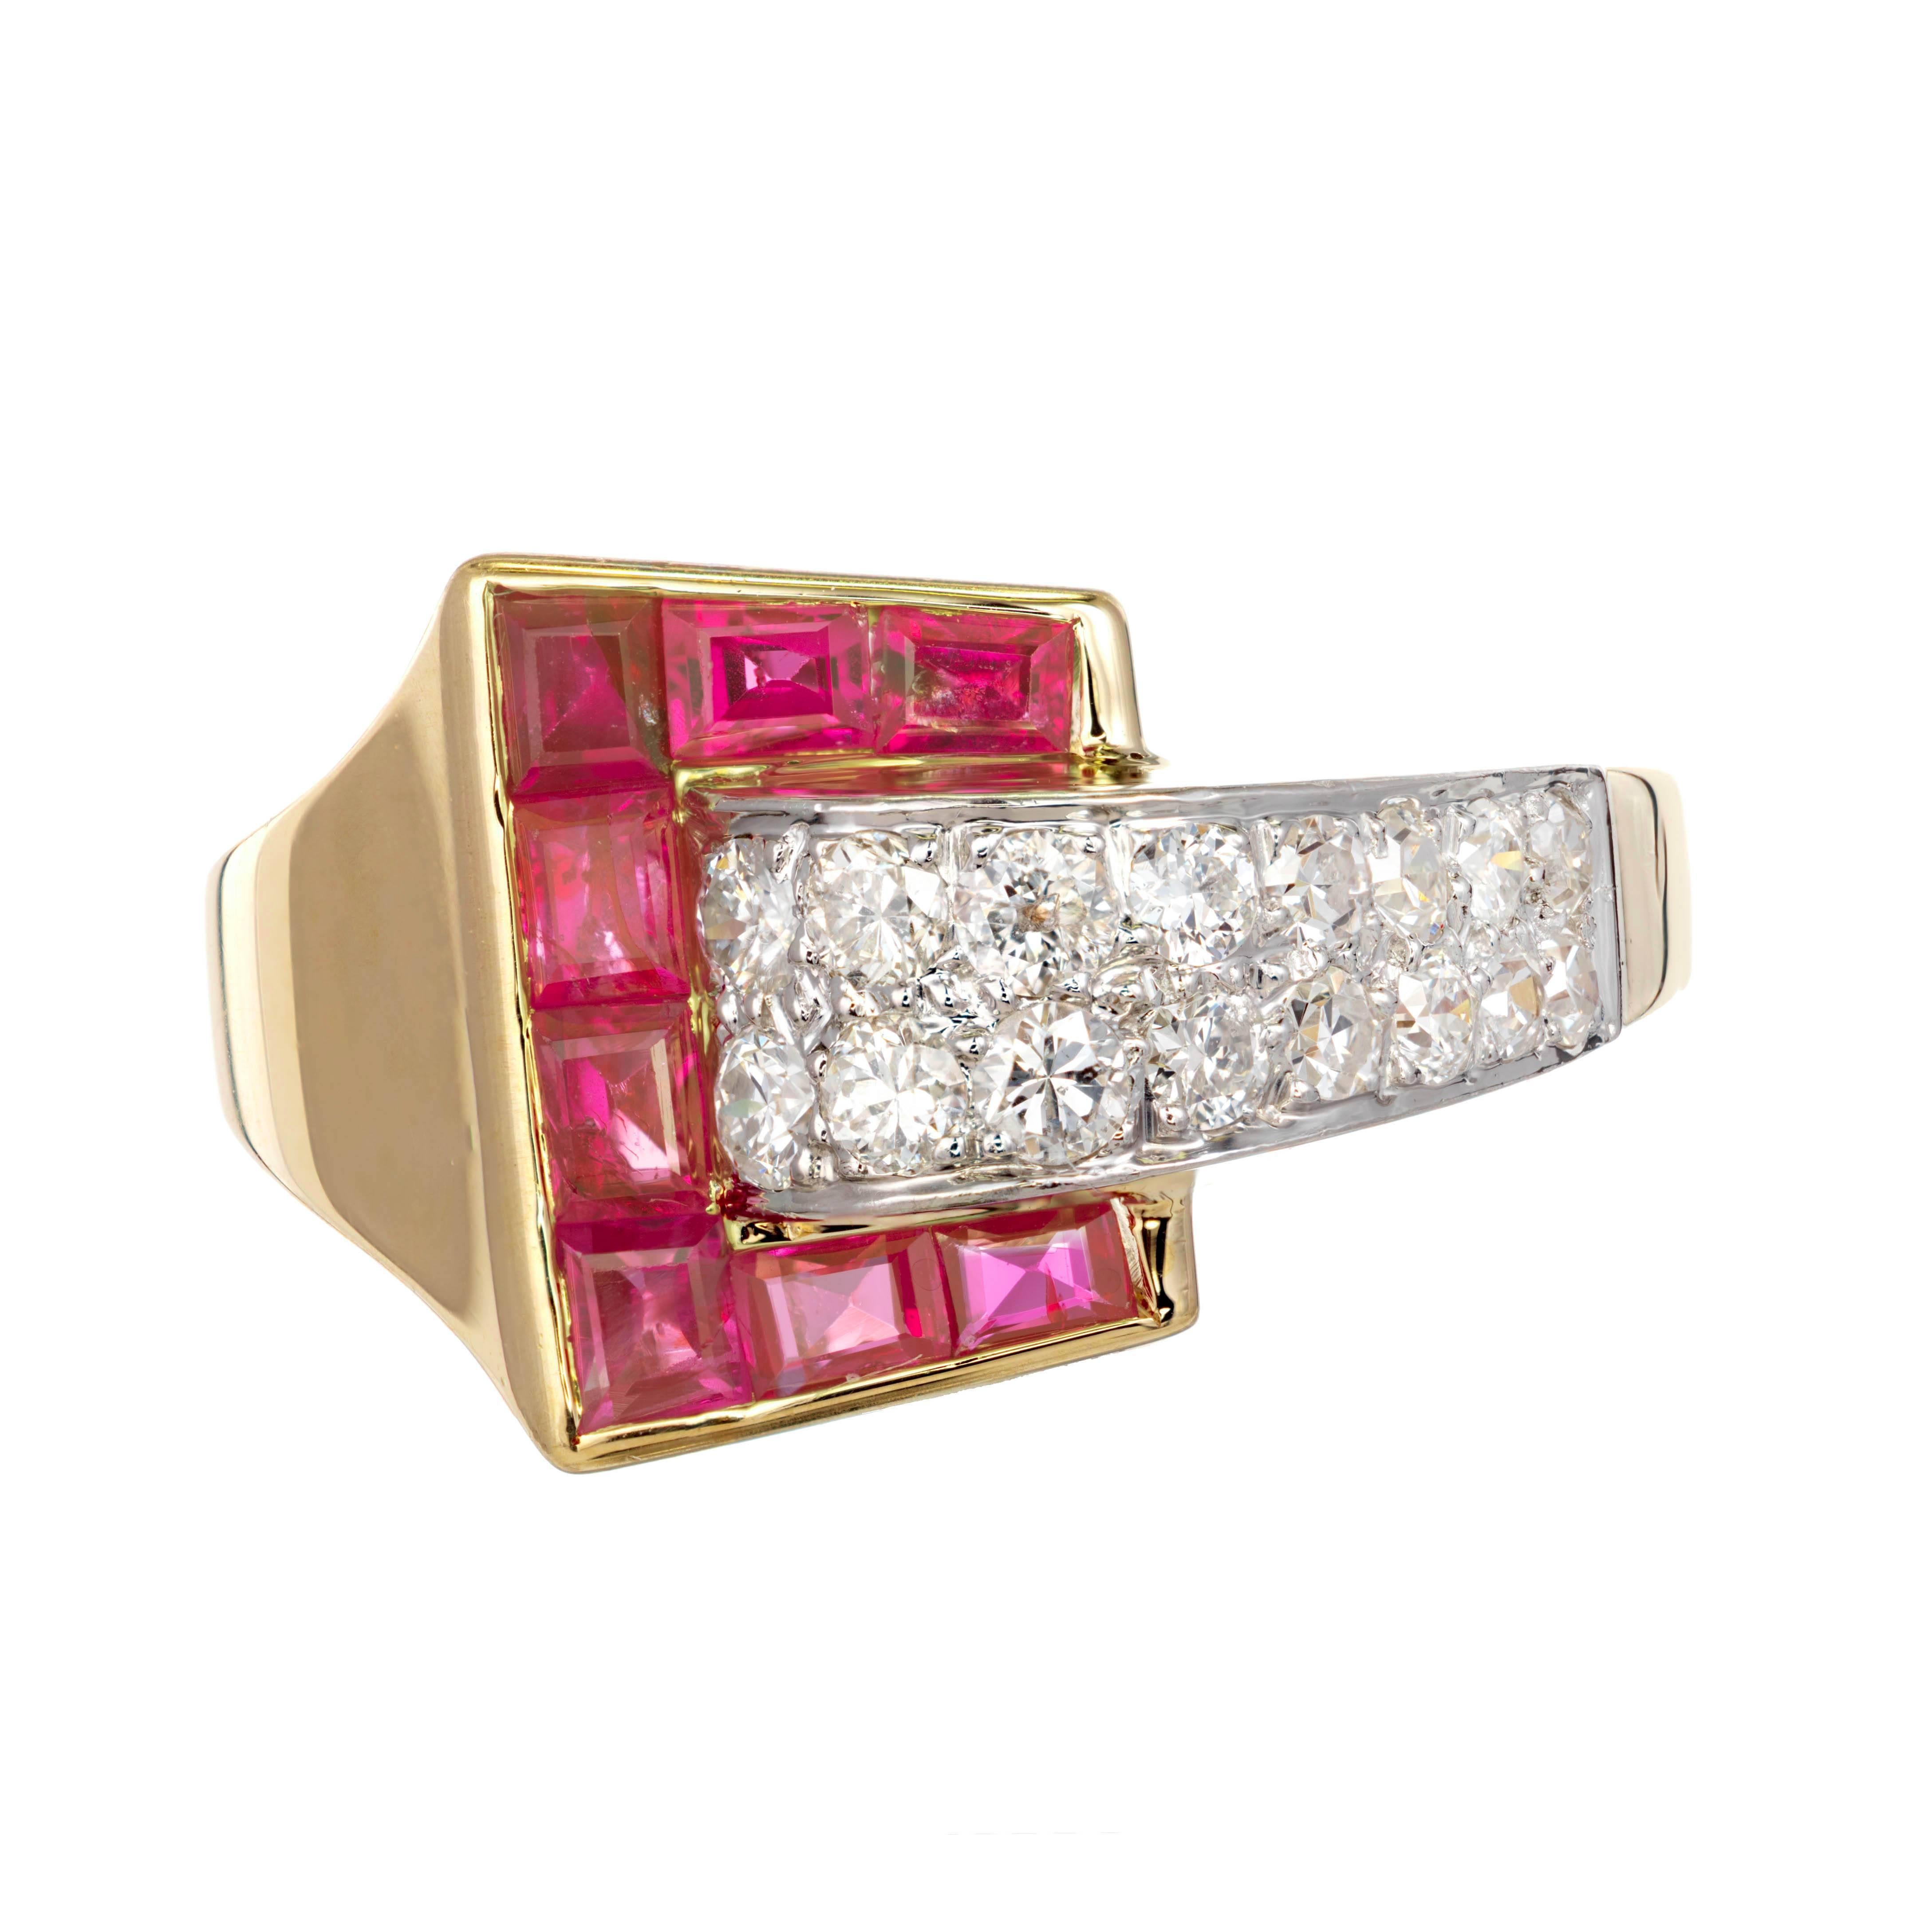 Ruby and diamond Buckle style cocktail ring. Solid 18k yellow gold and Platinum under fine white well cut diamonds. Natural no heat untreated genuine Rubies with a GIA certified. 

GIA certified #2145503818 natural no heat and no enhancement step